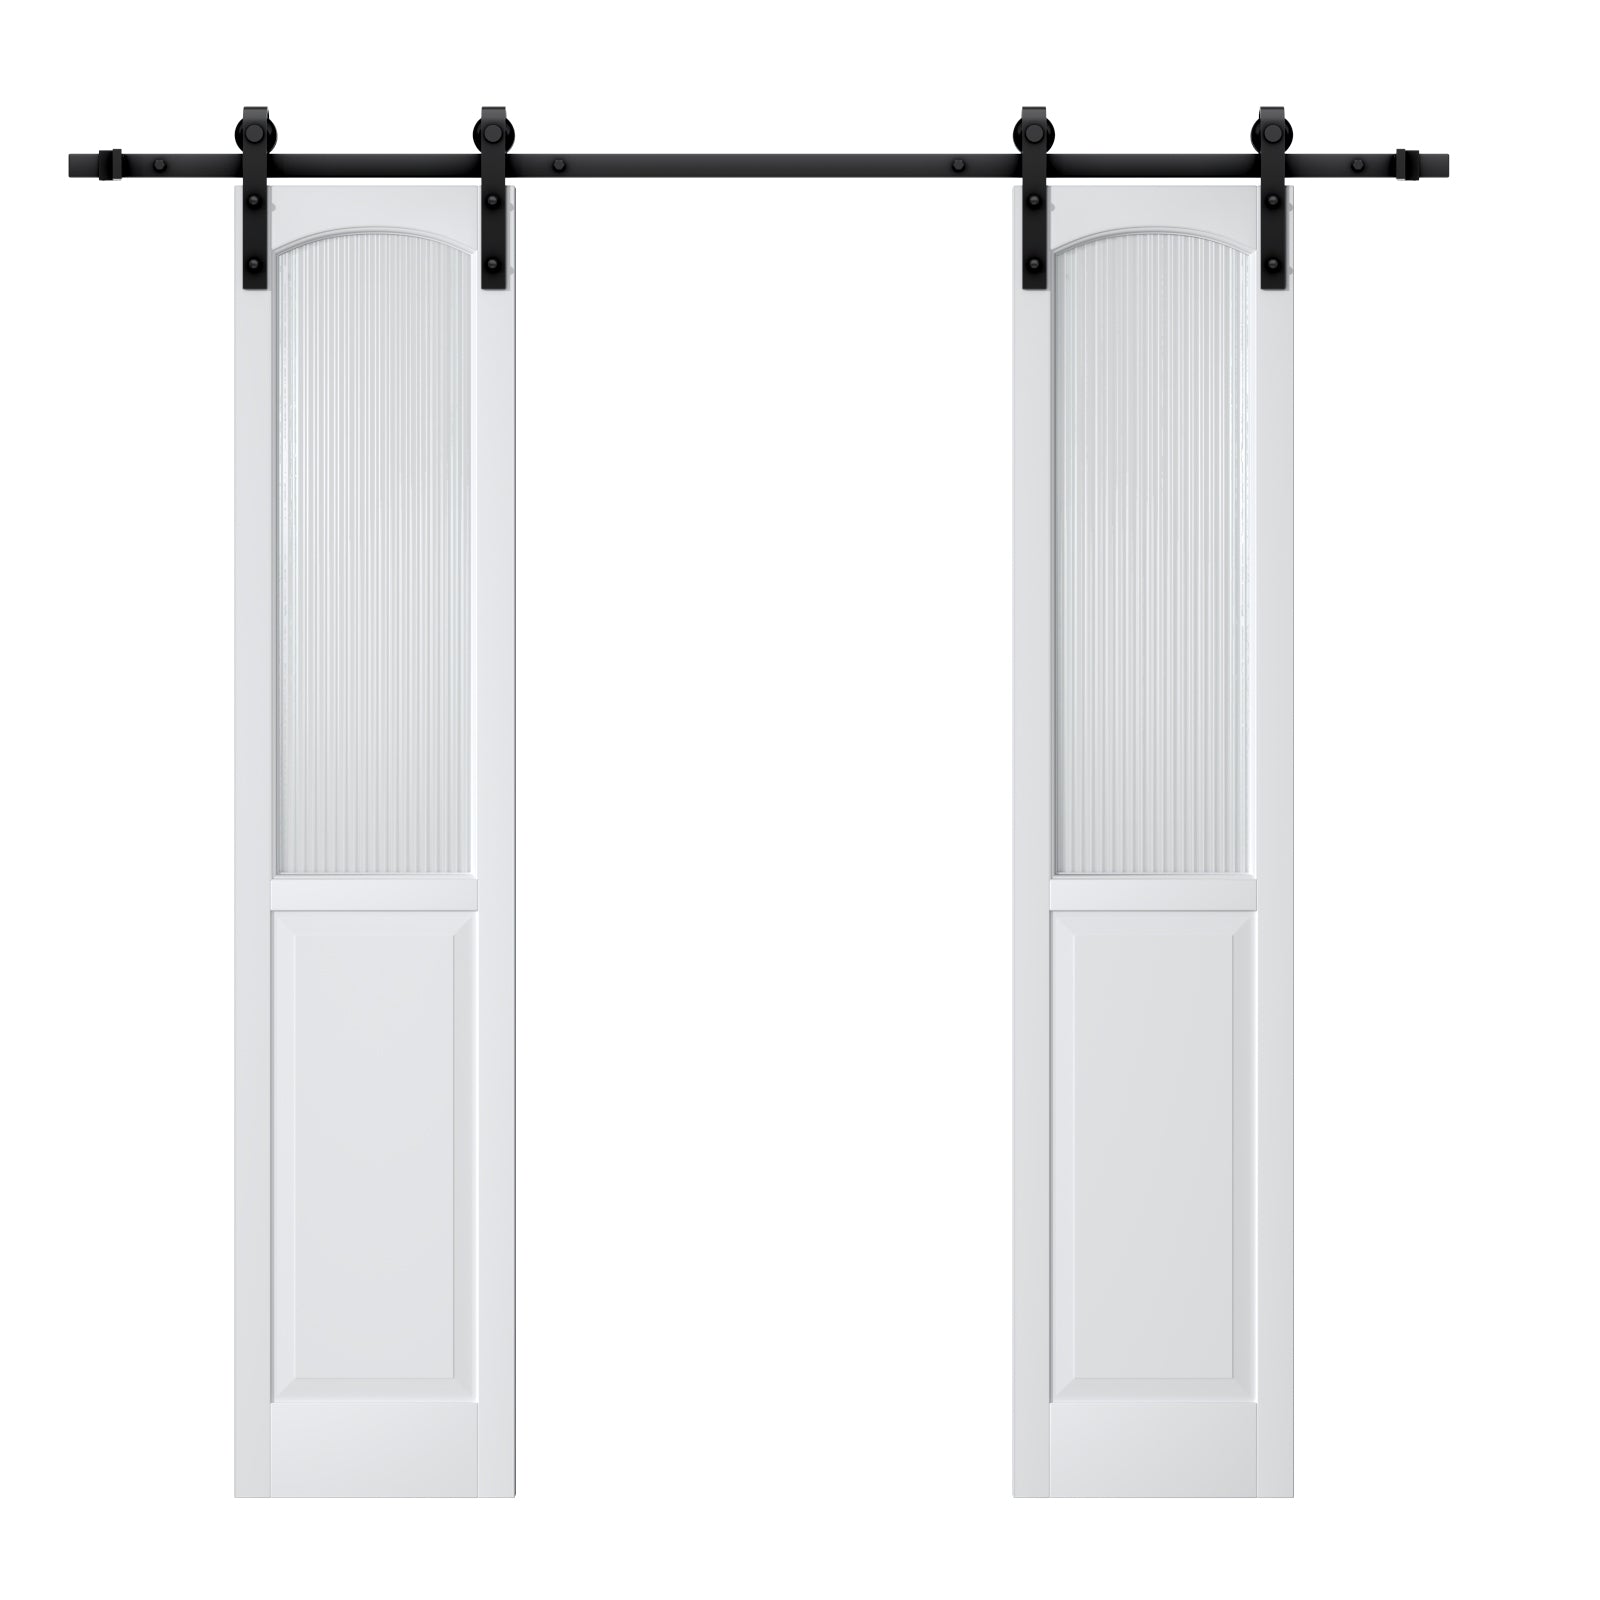 Ark Design Double Sliding Barn Door, Half Lite Moru Glass, Solid Core MDF Wood & PVC Covered Finished, with Hardware Kit & Handle & Floor Guide, White